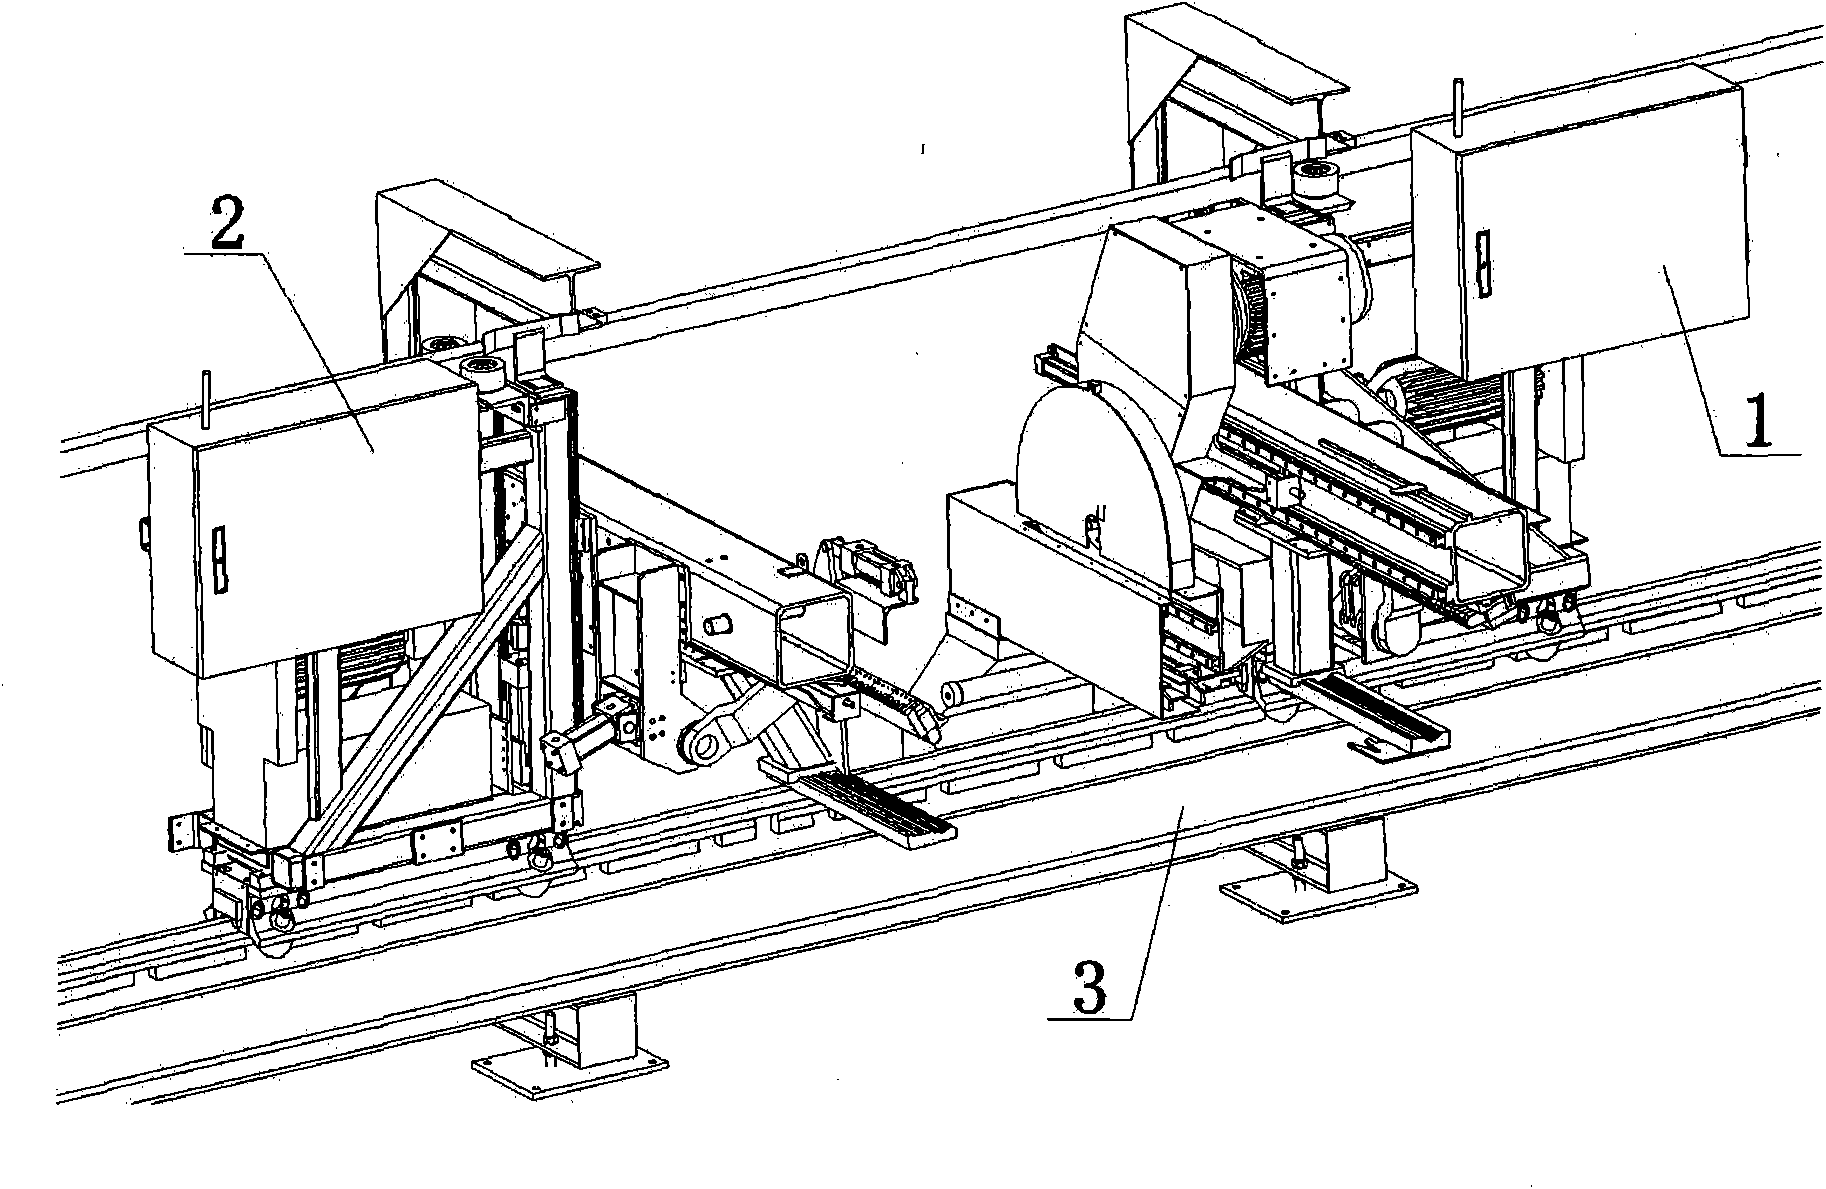 Process flow of single-track double-end dragger with flying saw